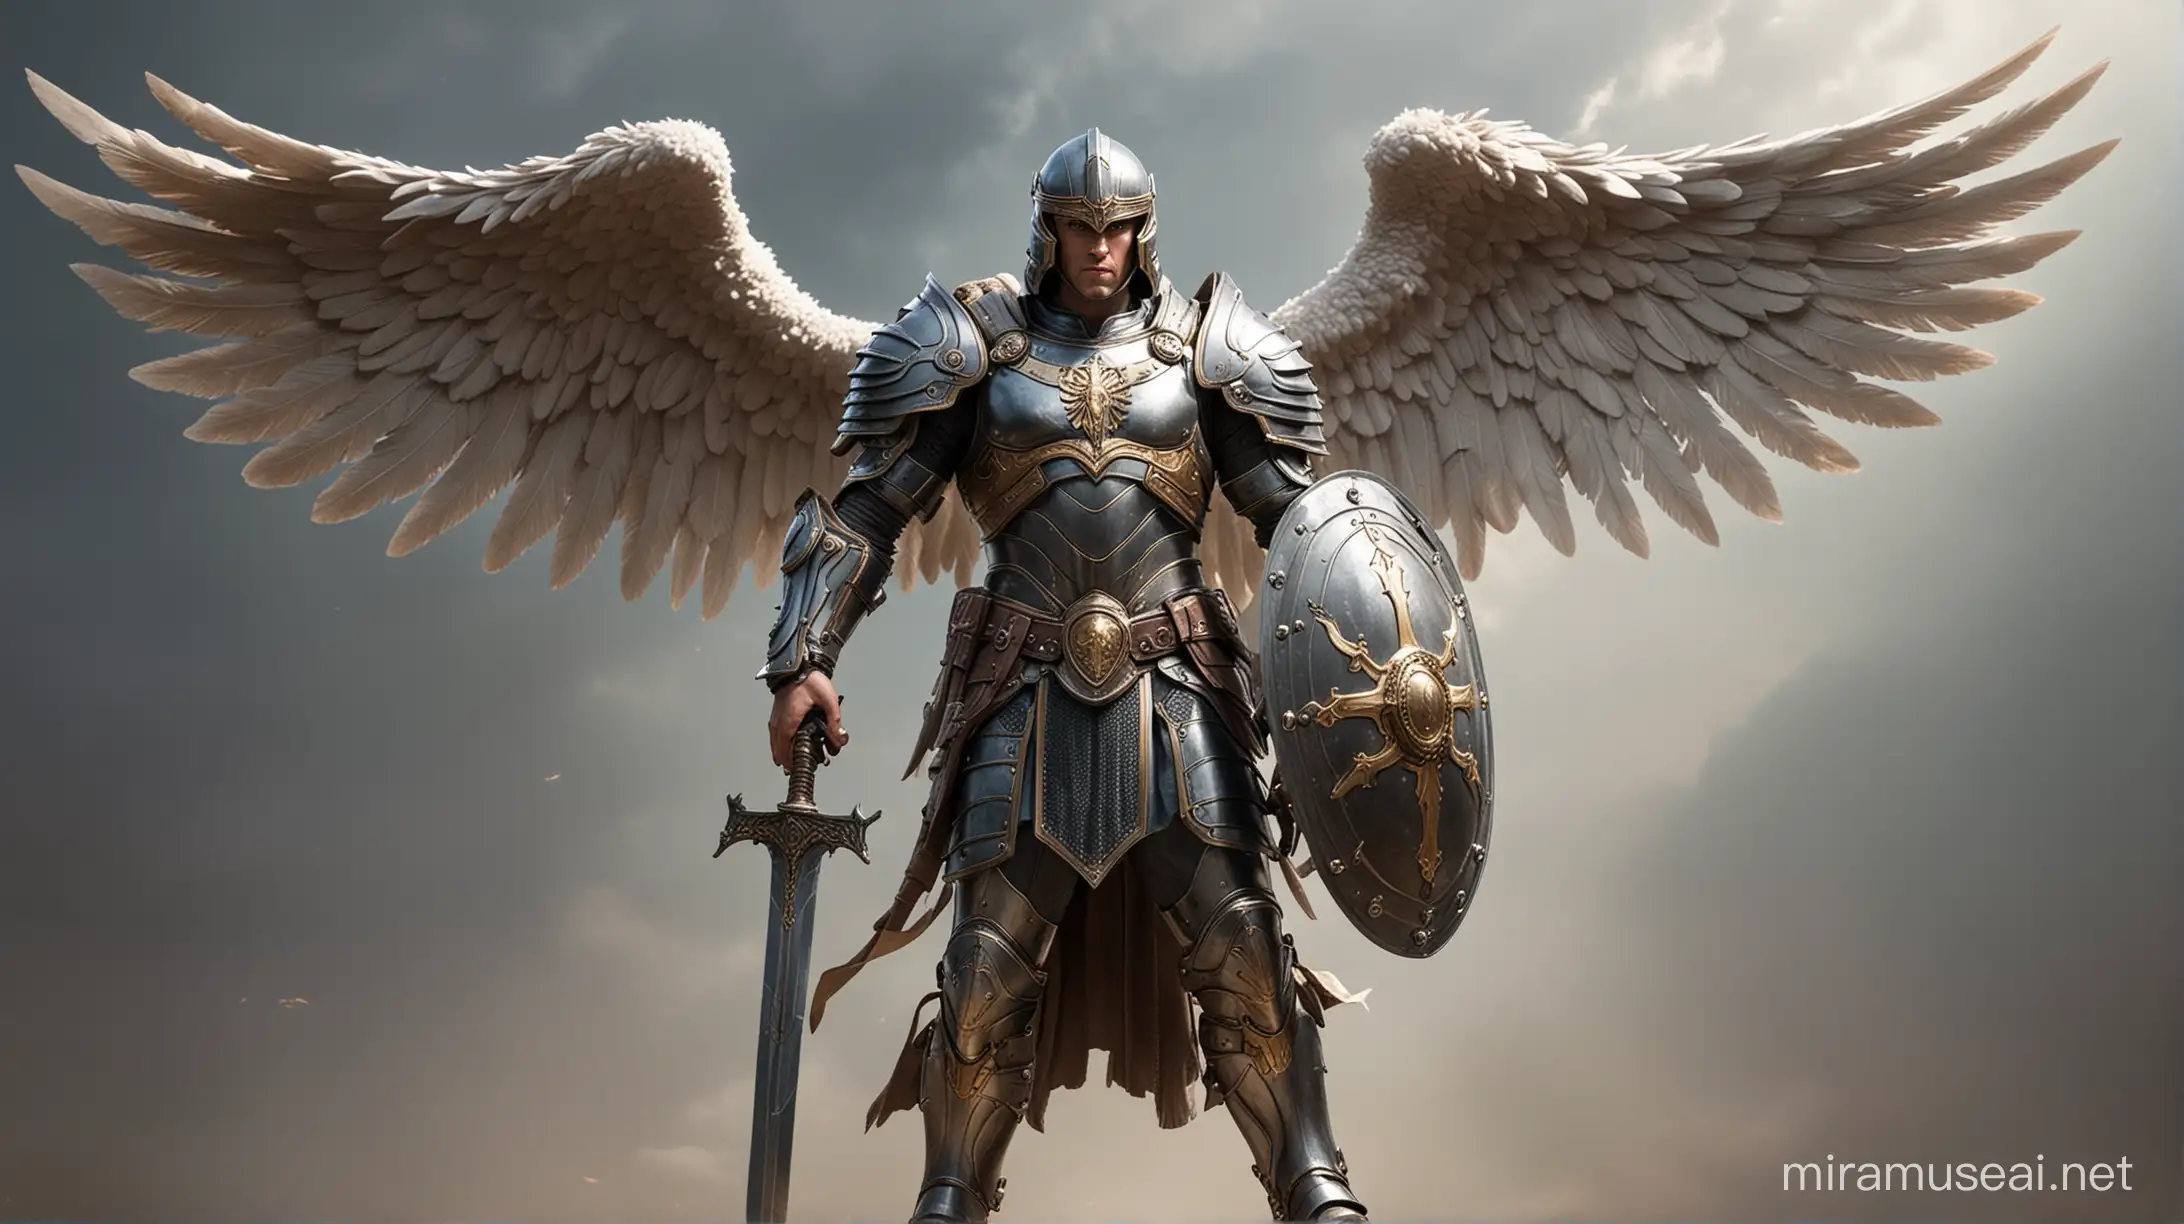 Archangel Michael in Full Body Armor with Sword and Shield for Final Battle